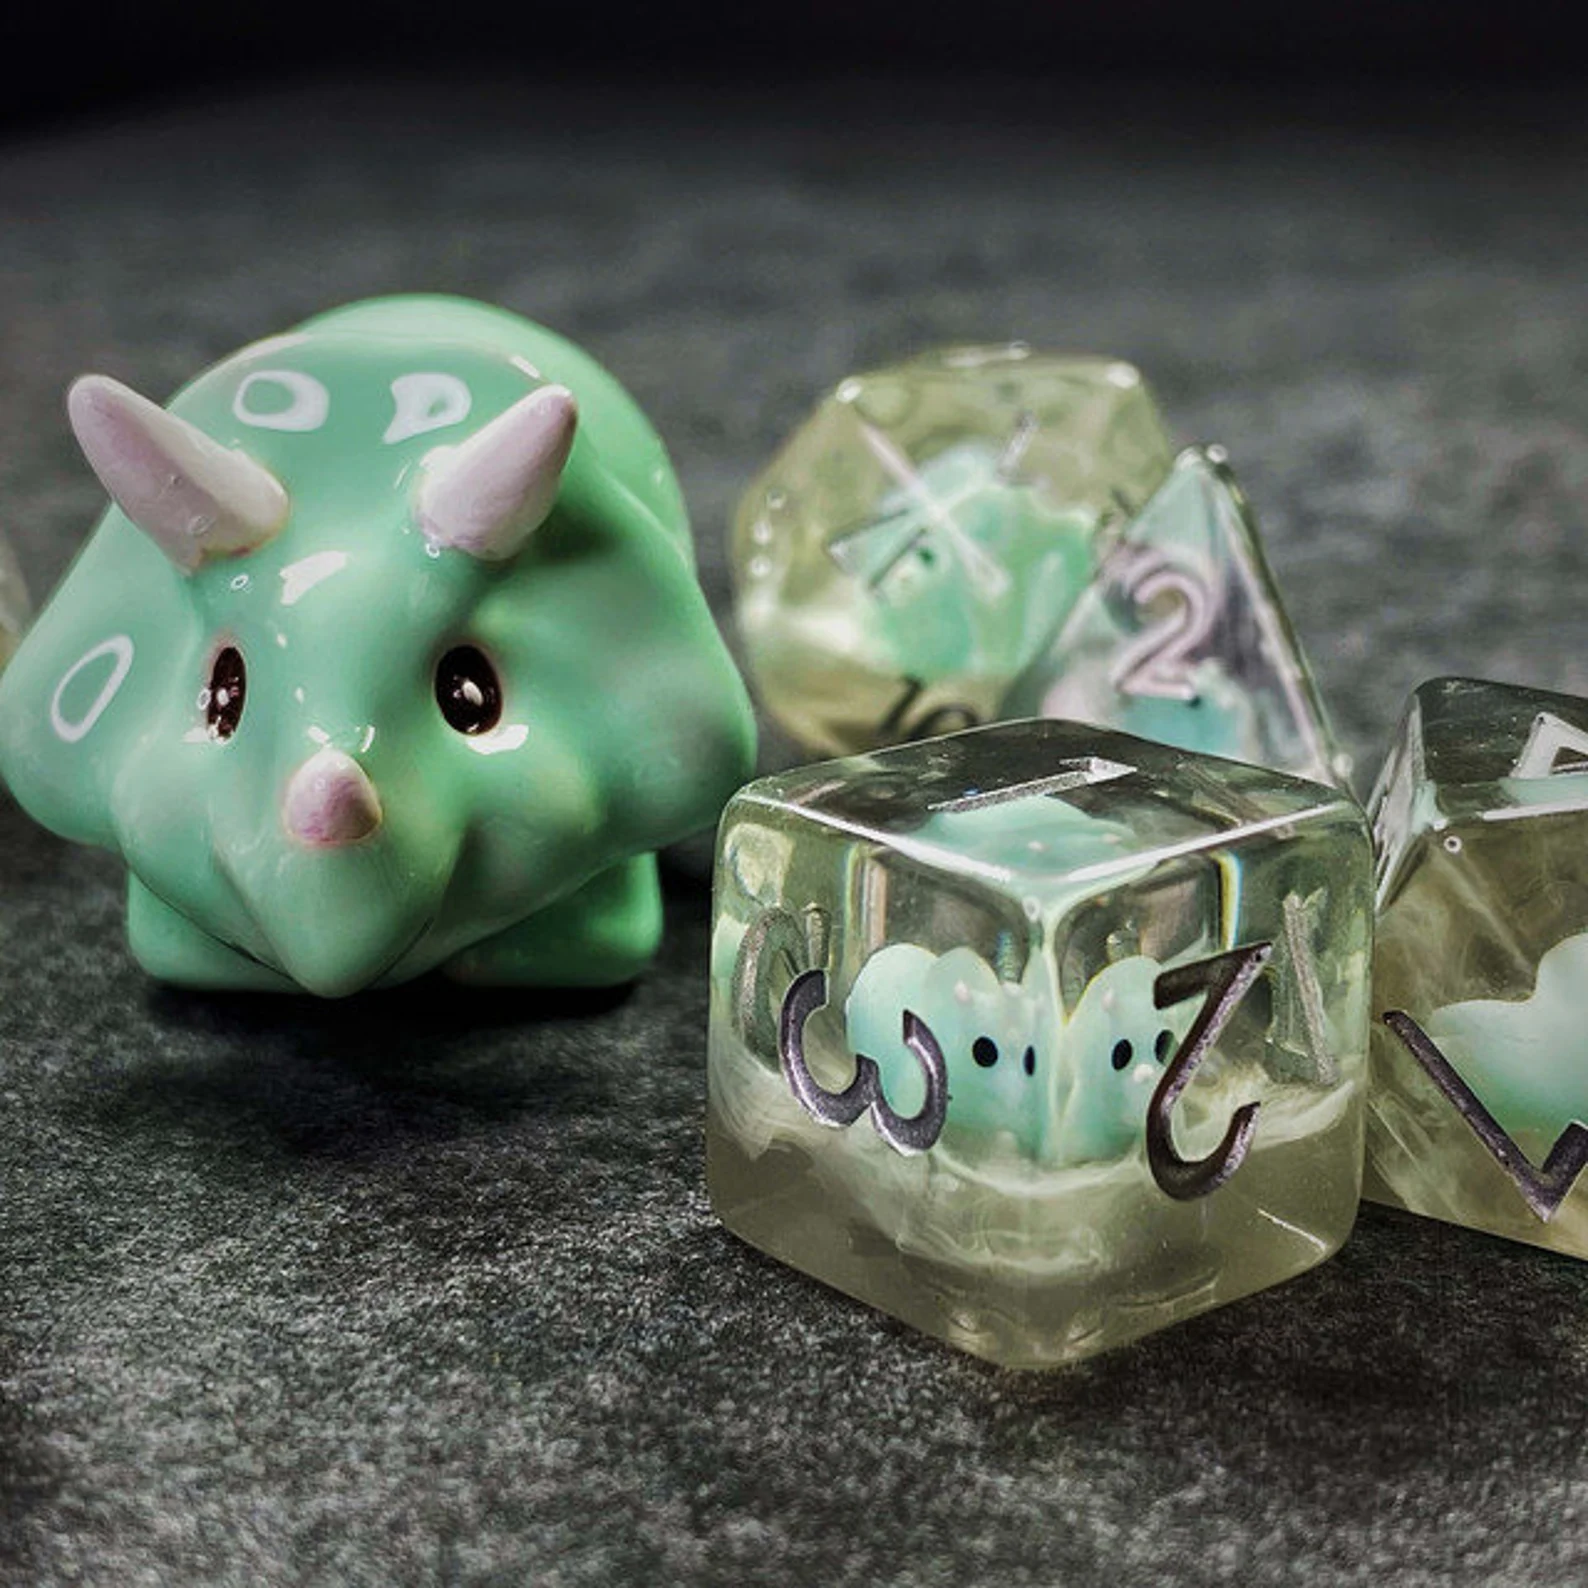 A photo of a set of four clear dice with silver numbers on the faces and teal Baby Triceratops inside. A larger ceramic teal Baby Triceratops is on the left of the photo.